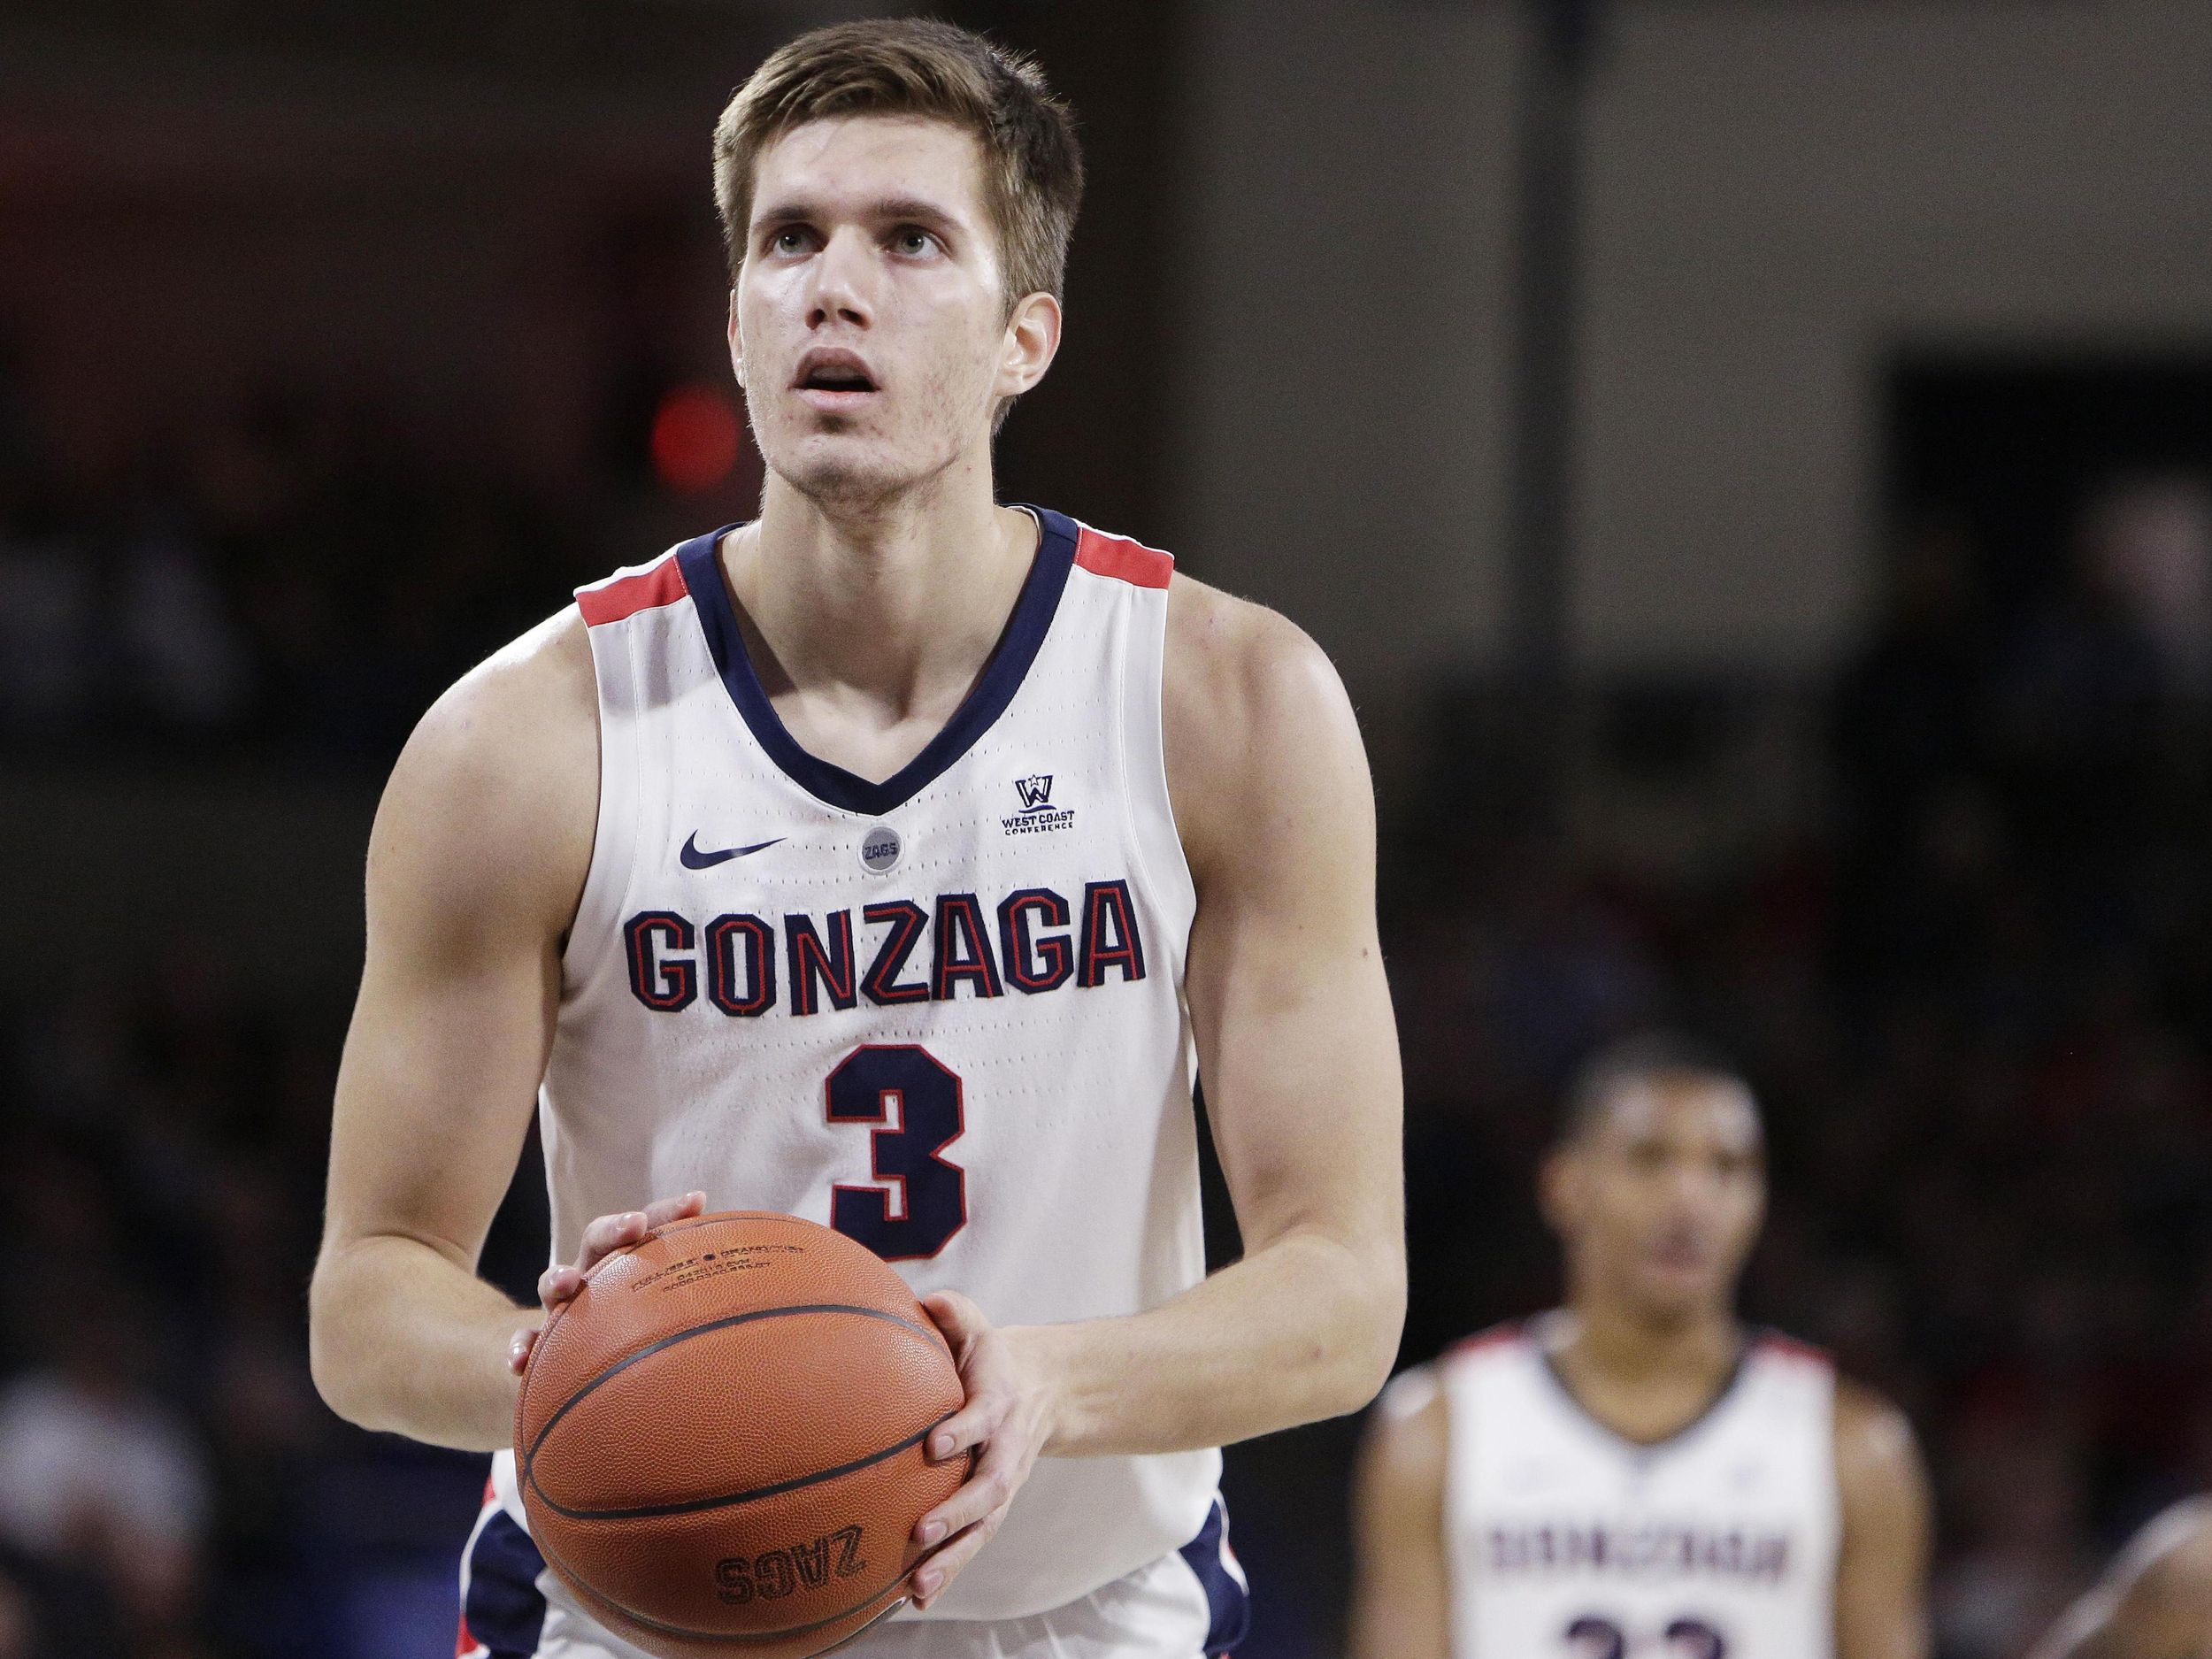 Gonzaga&#39;s Filip Petrusev has seen decrease in playing time, but it hasn&#39;t affected his effort | The Spokesman-Review